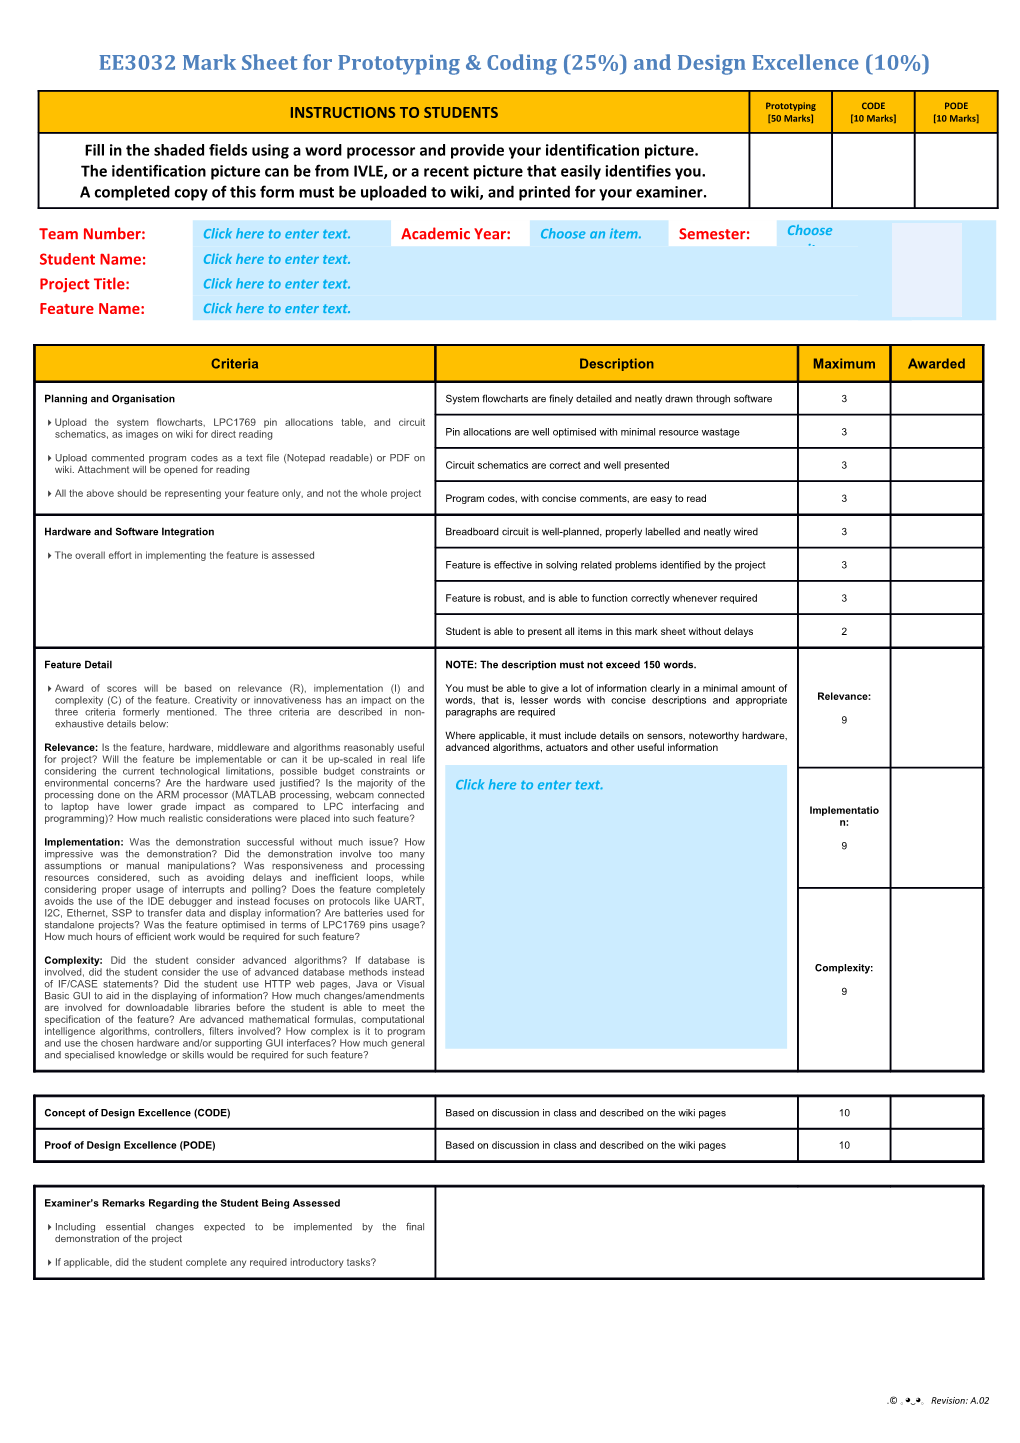 EE3032 Mark Sheet for Prototyping & Coding (25%) and Design Excellence (10%)